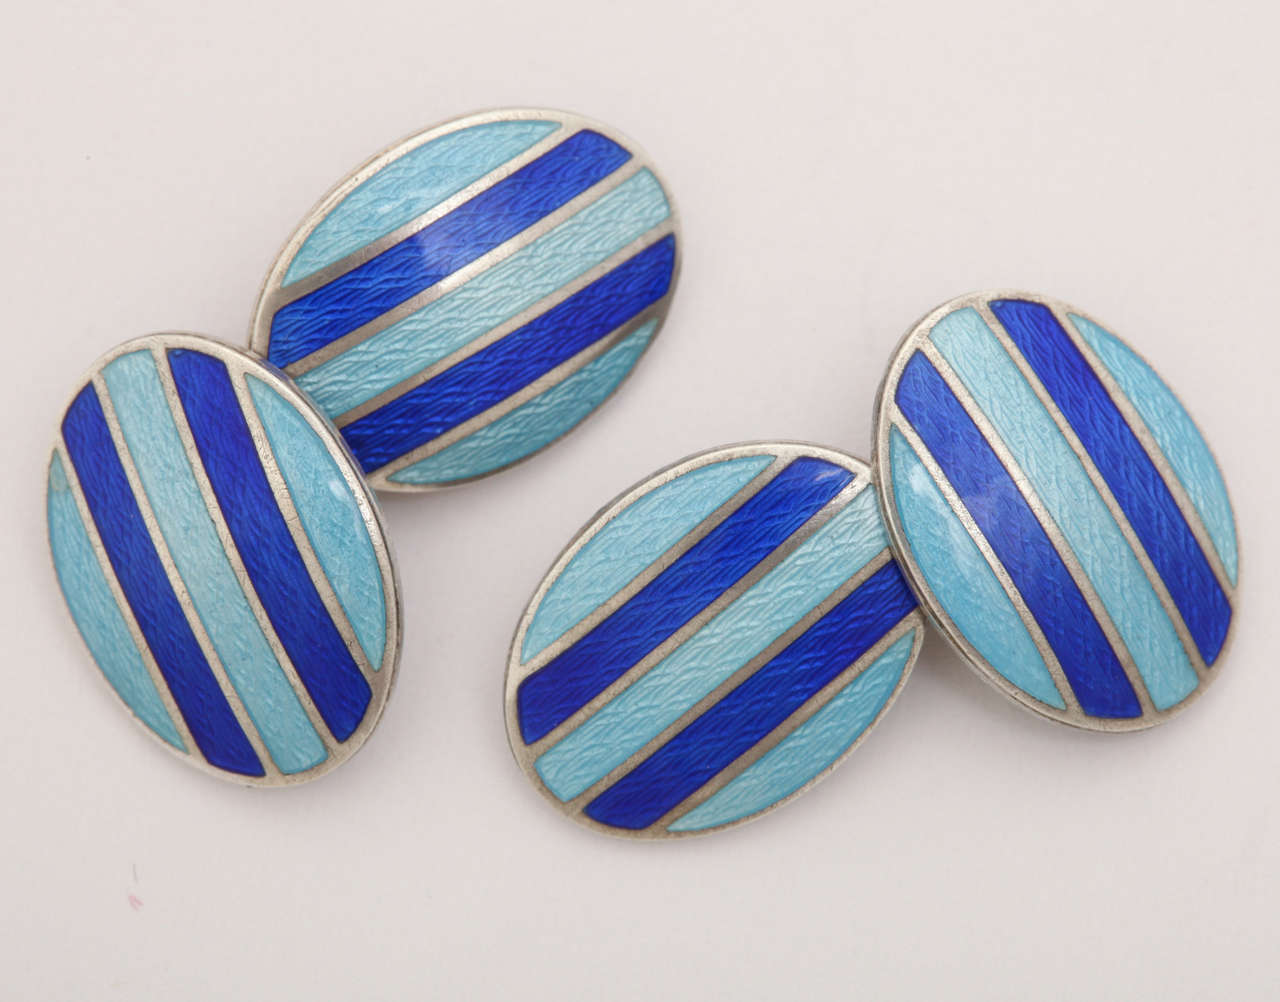 Oval with medium blue and navy blue stripes.
Hallmarks: STERLING